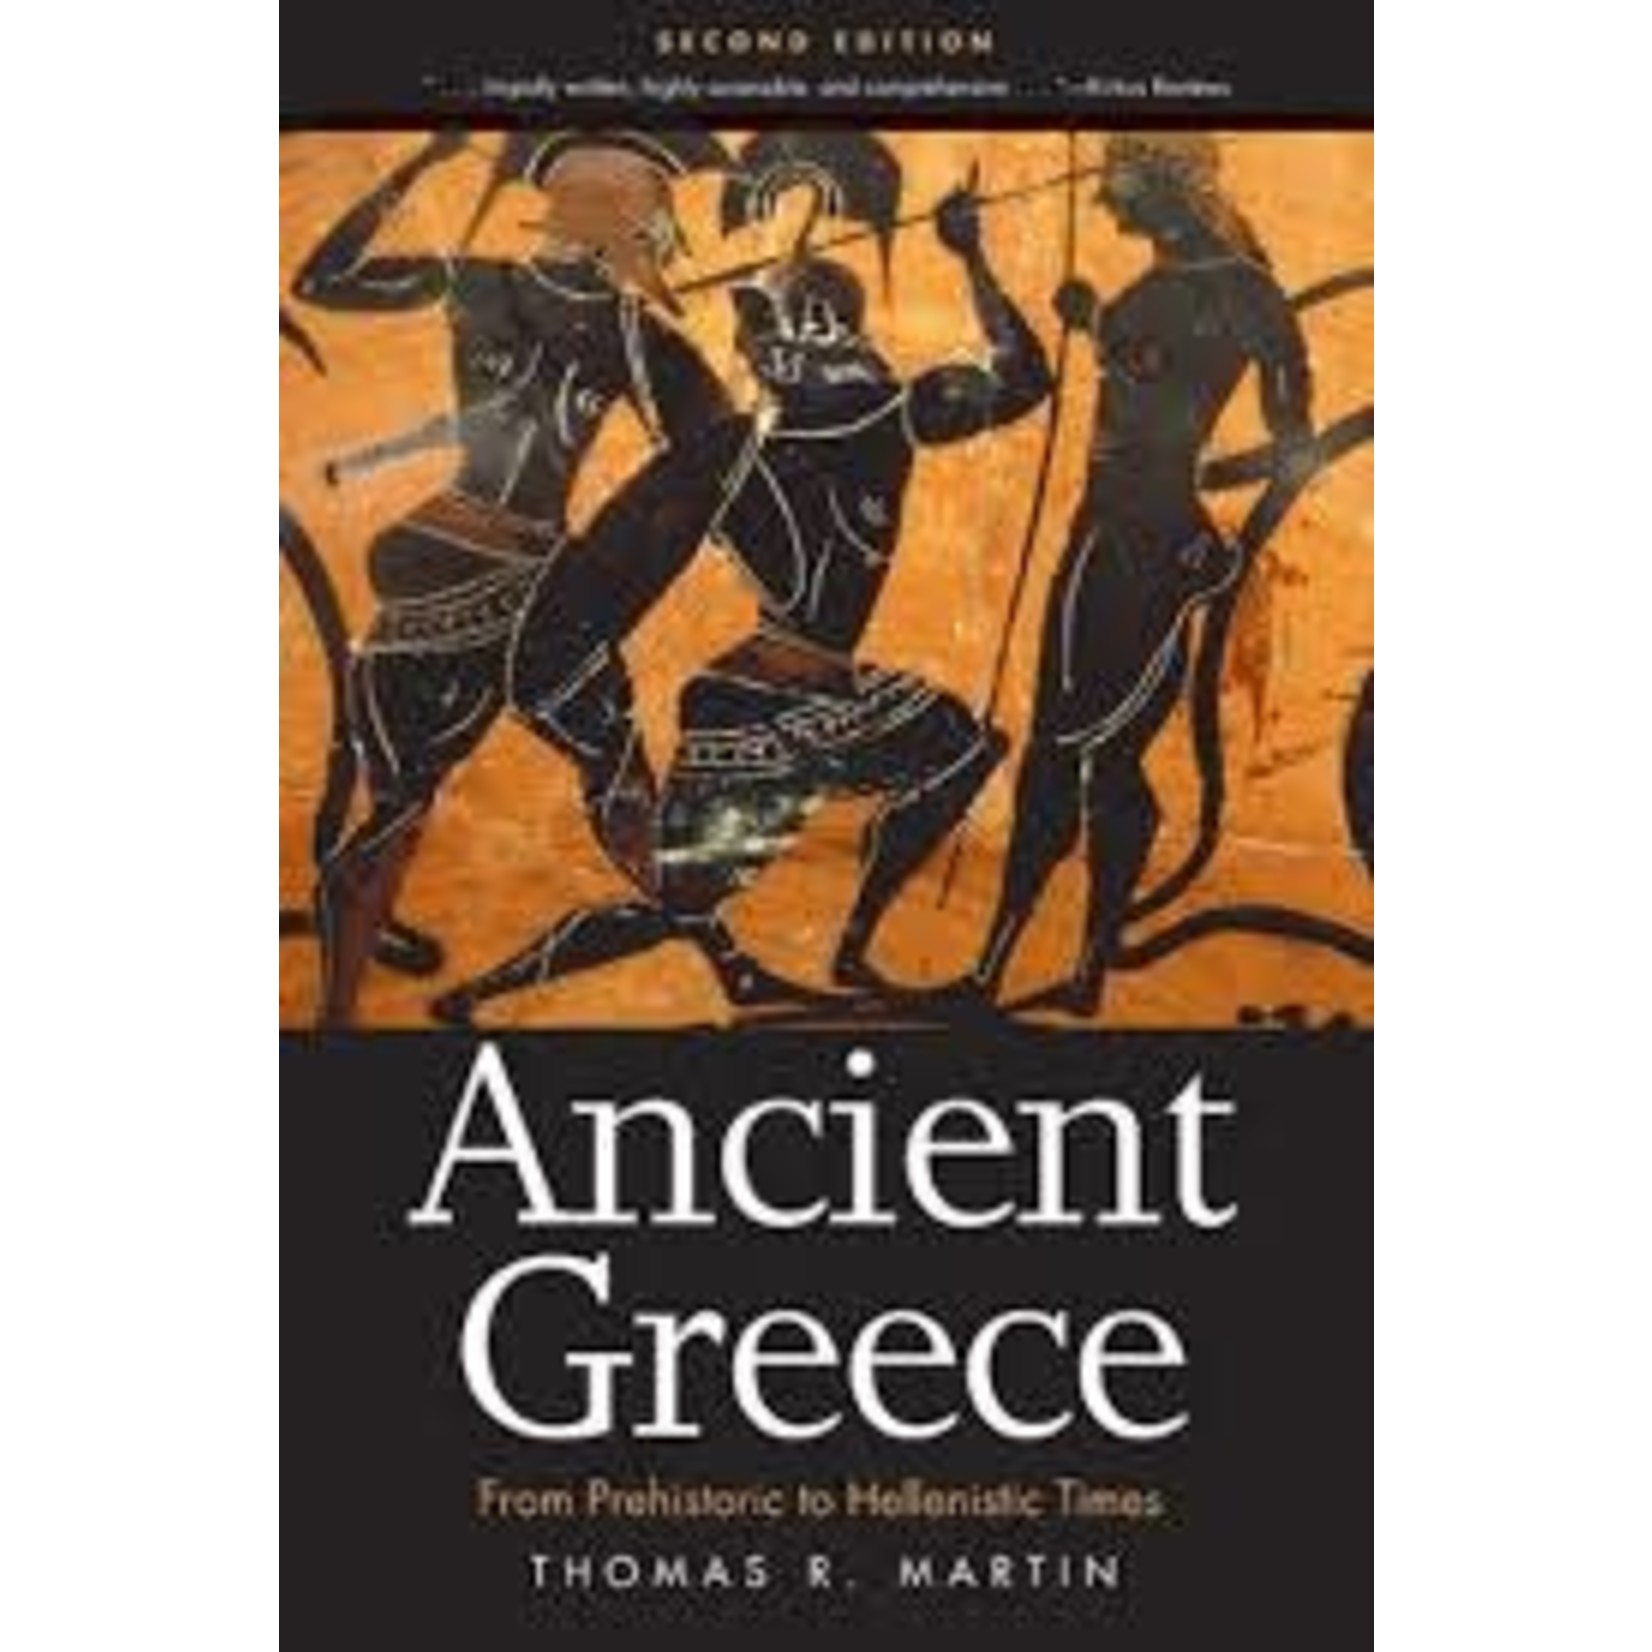 Ancient Greece from Prehistoric to Hellenistic Times